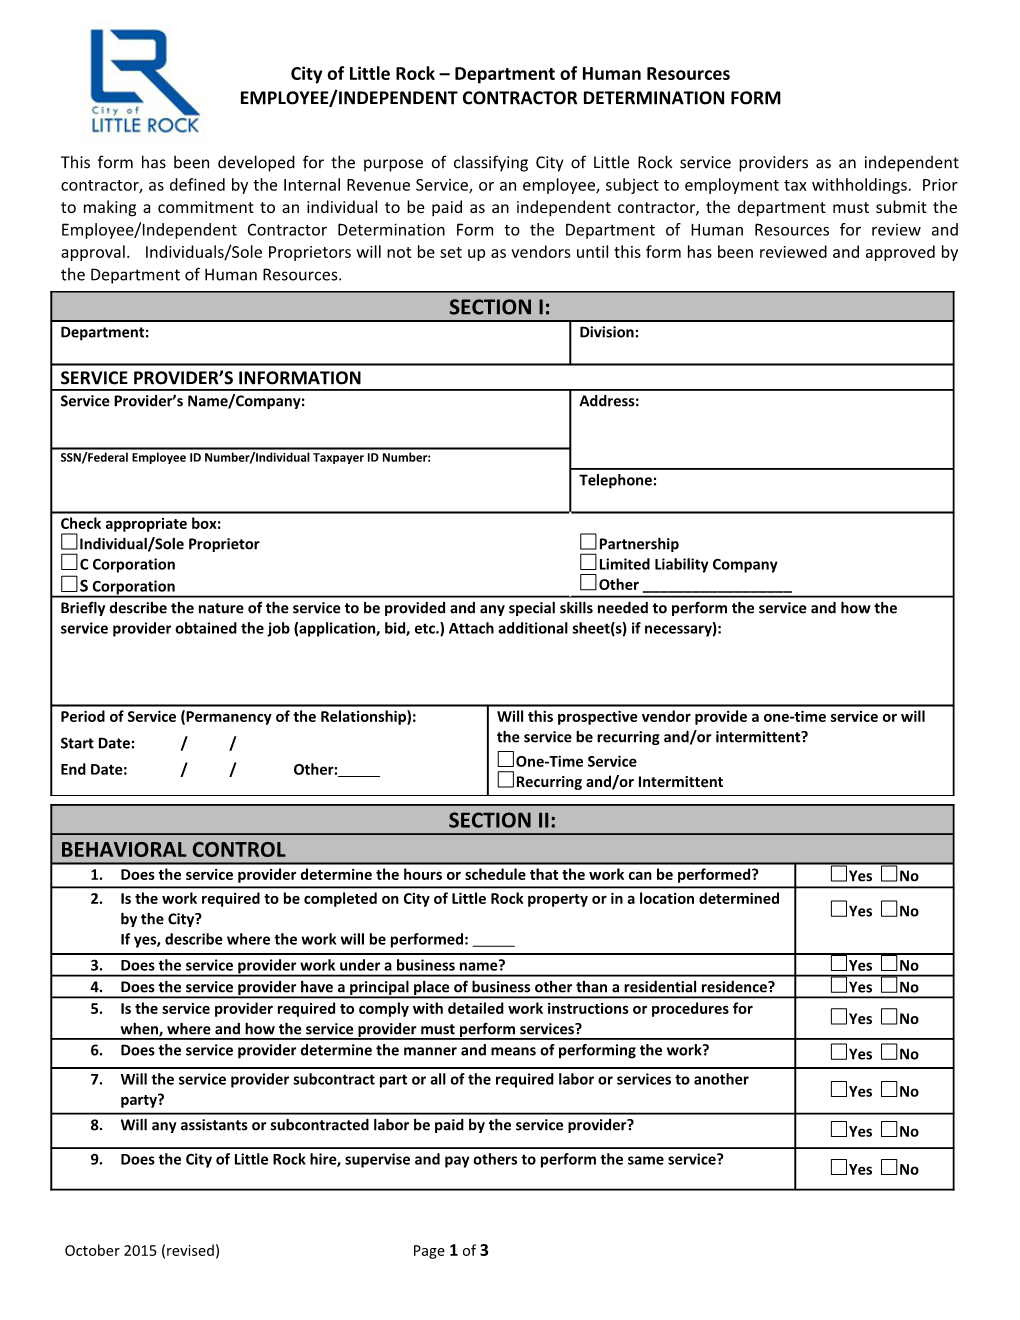 Employee/Independent Contractor Determination Form